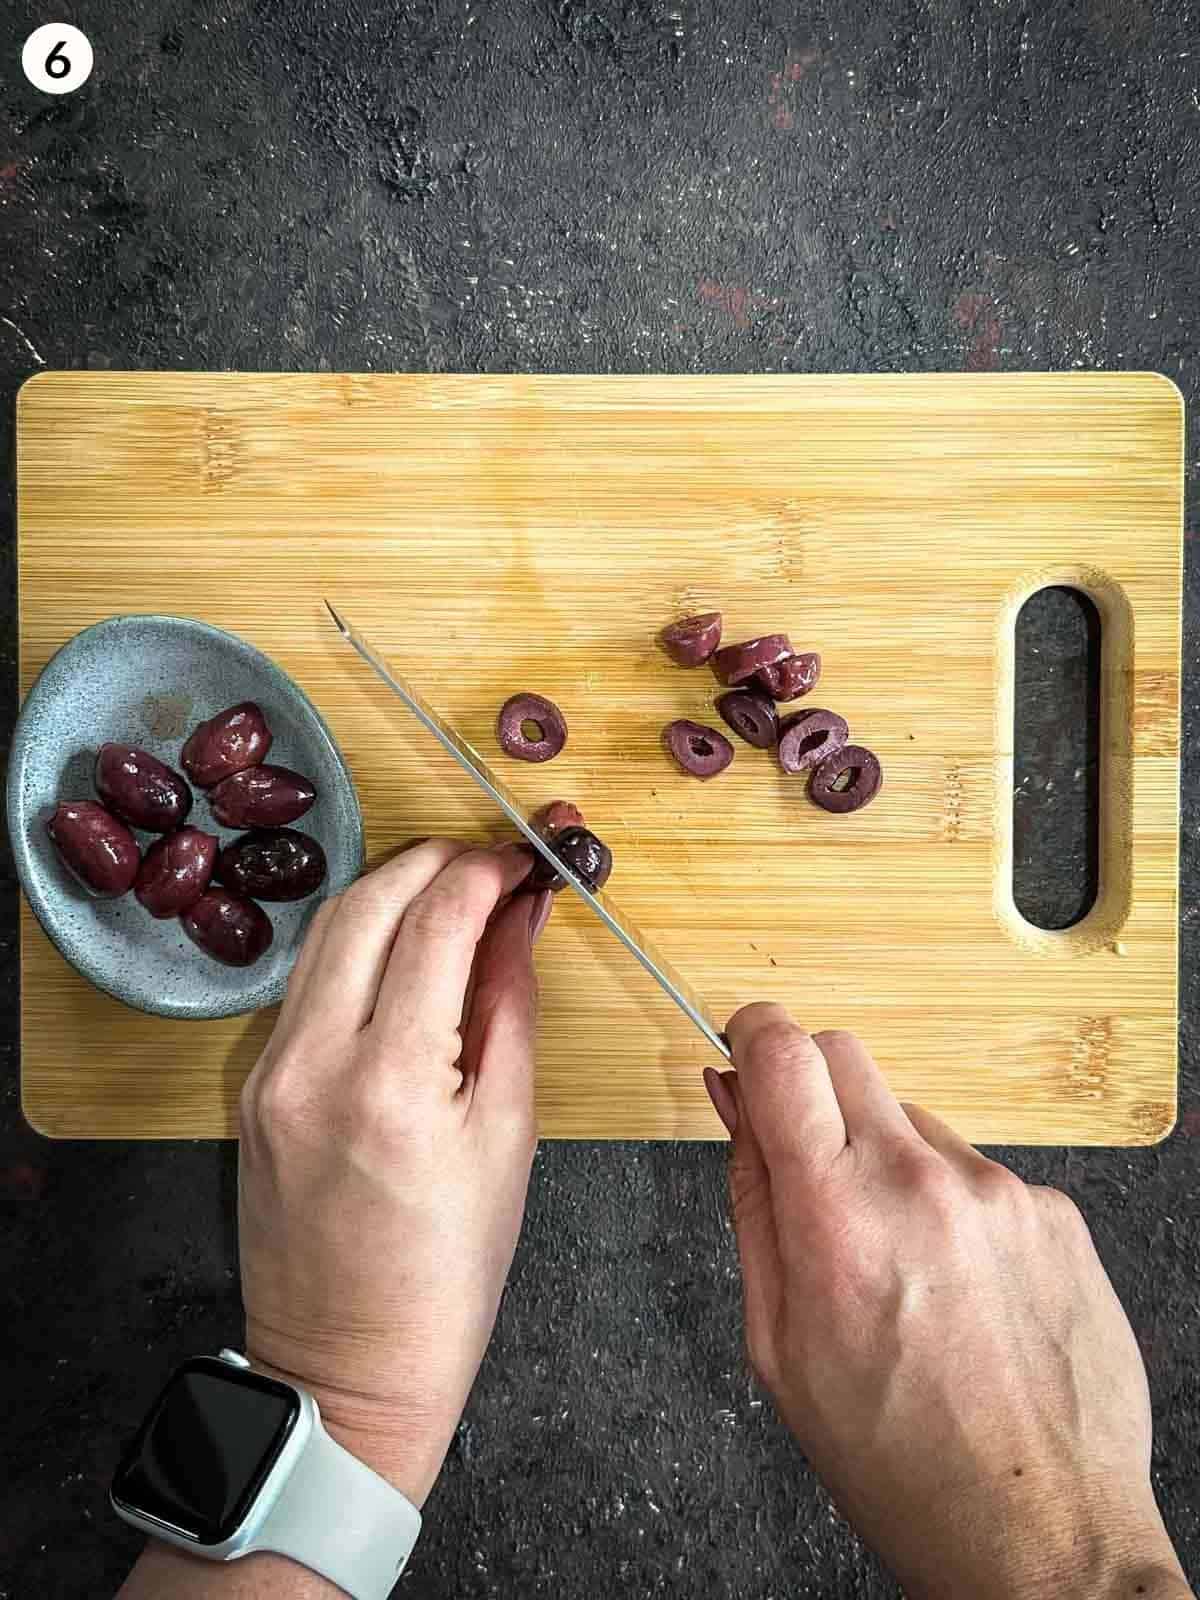 Cutting black olives with a knife on a wooden chopping board with a board of whole olives on the side